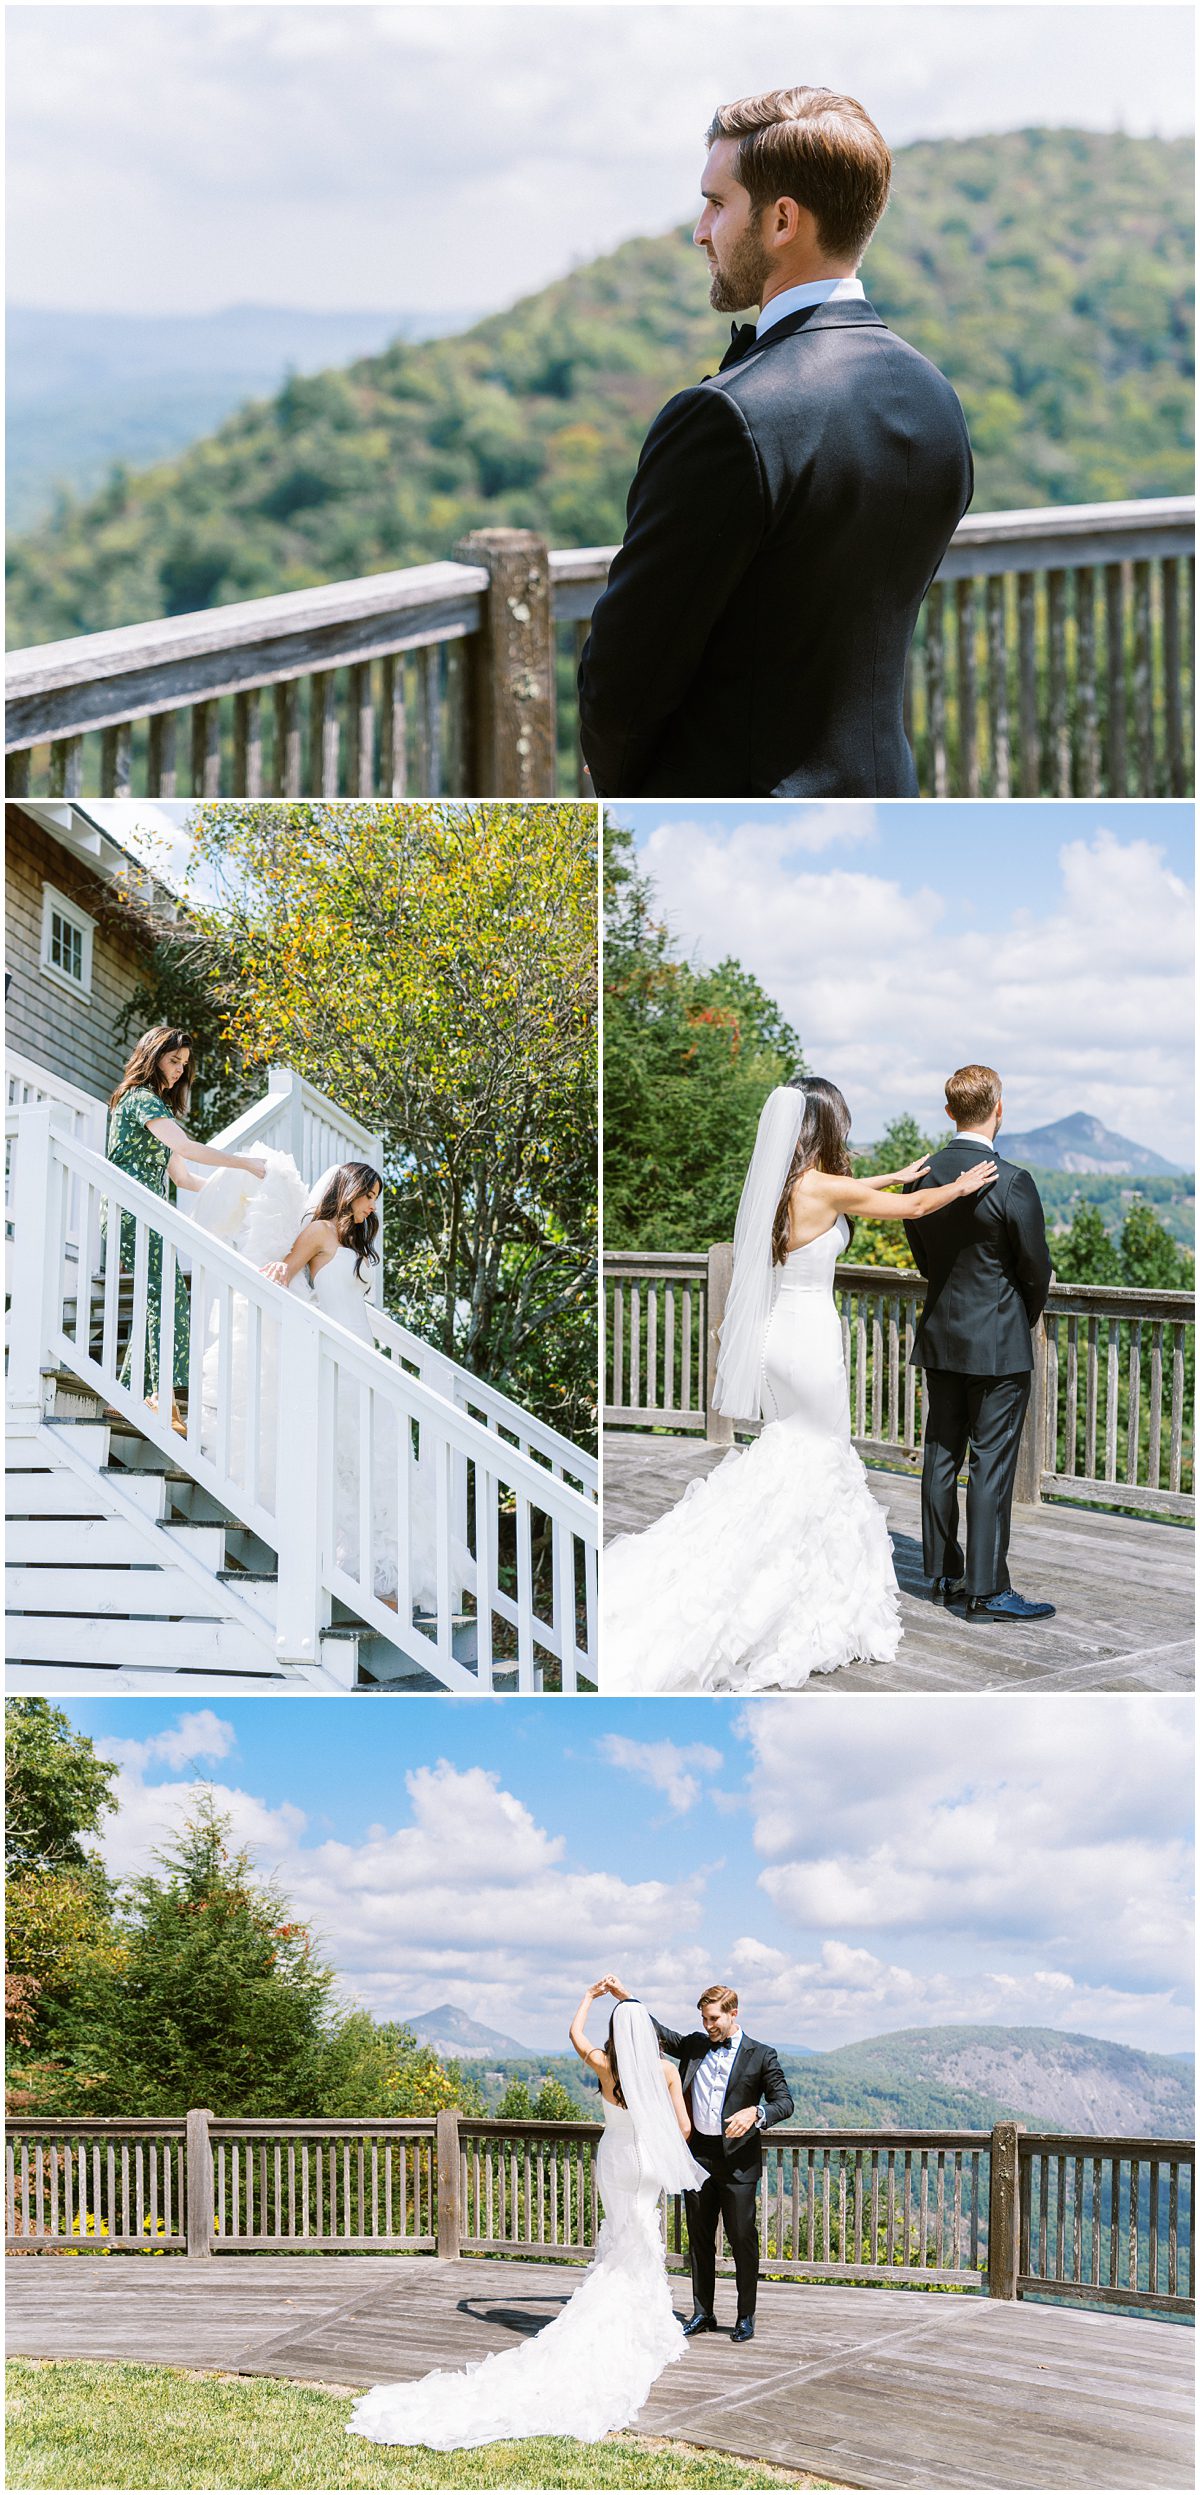 A breathtaking view of the Blue Ridge Mountains serves as a stunning backdrop for this romantic wedding first look at a private estate in Cashiers NC